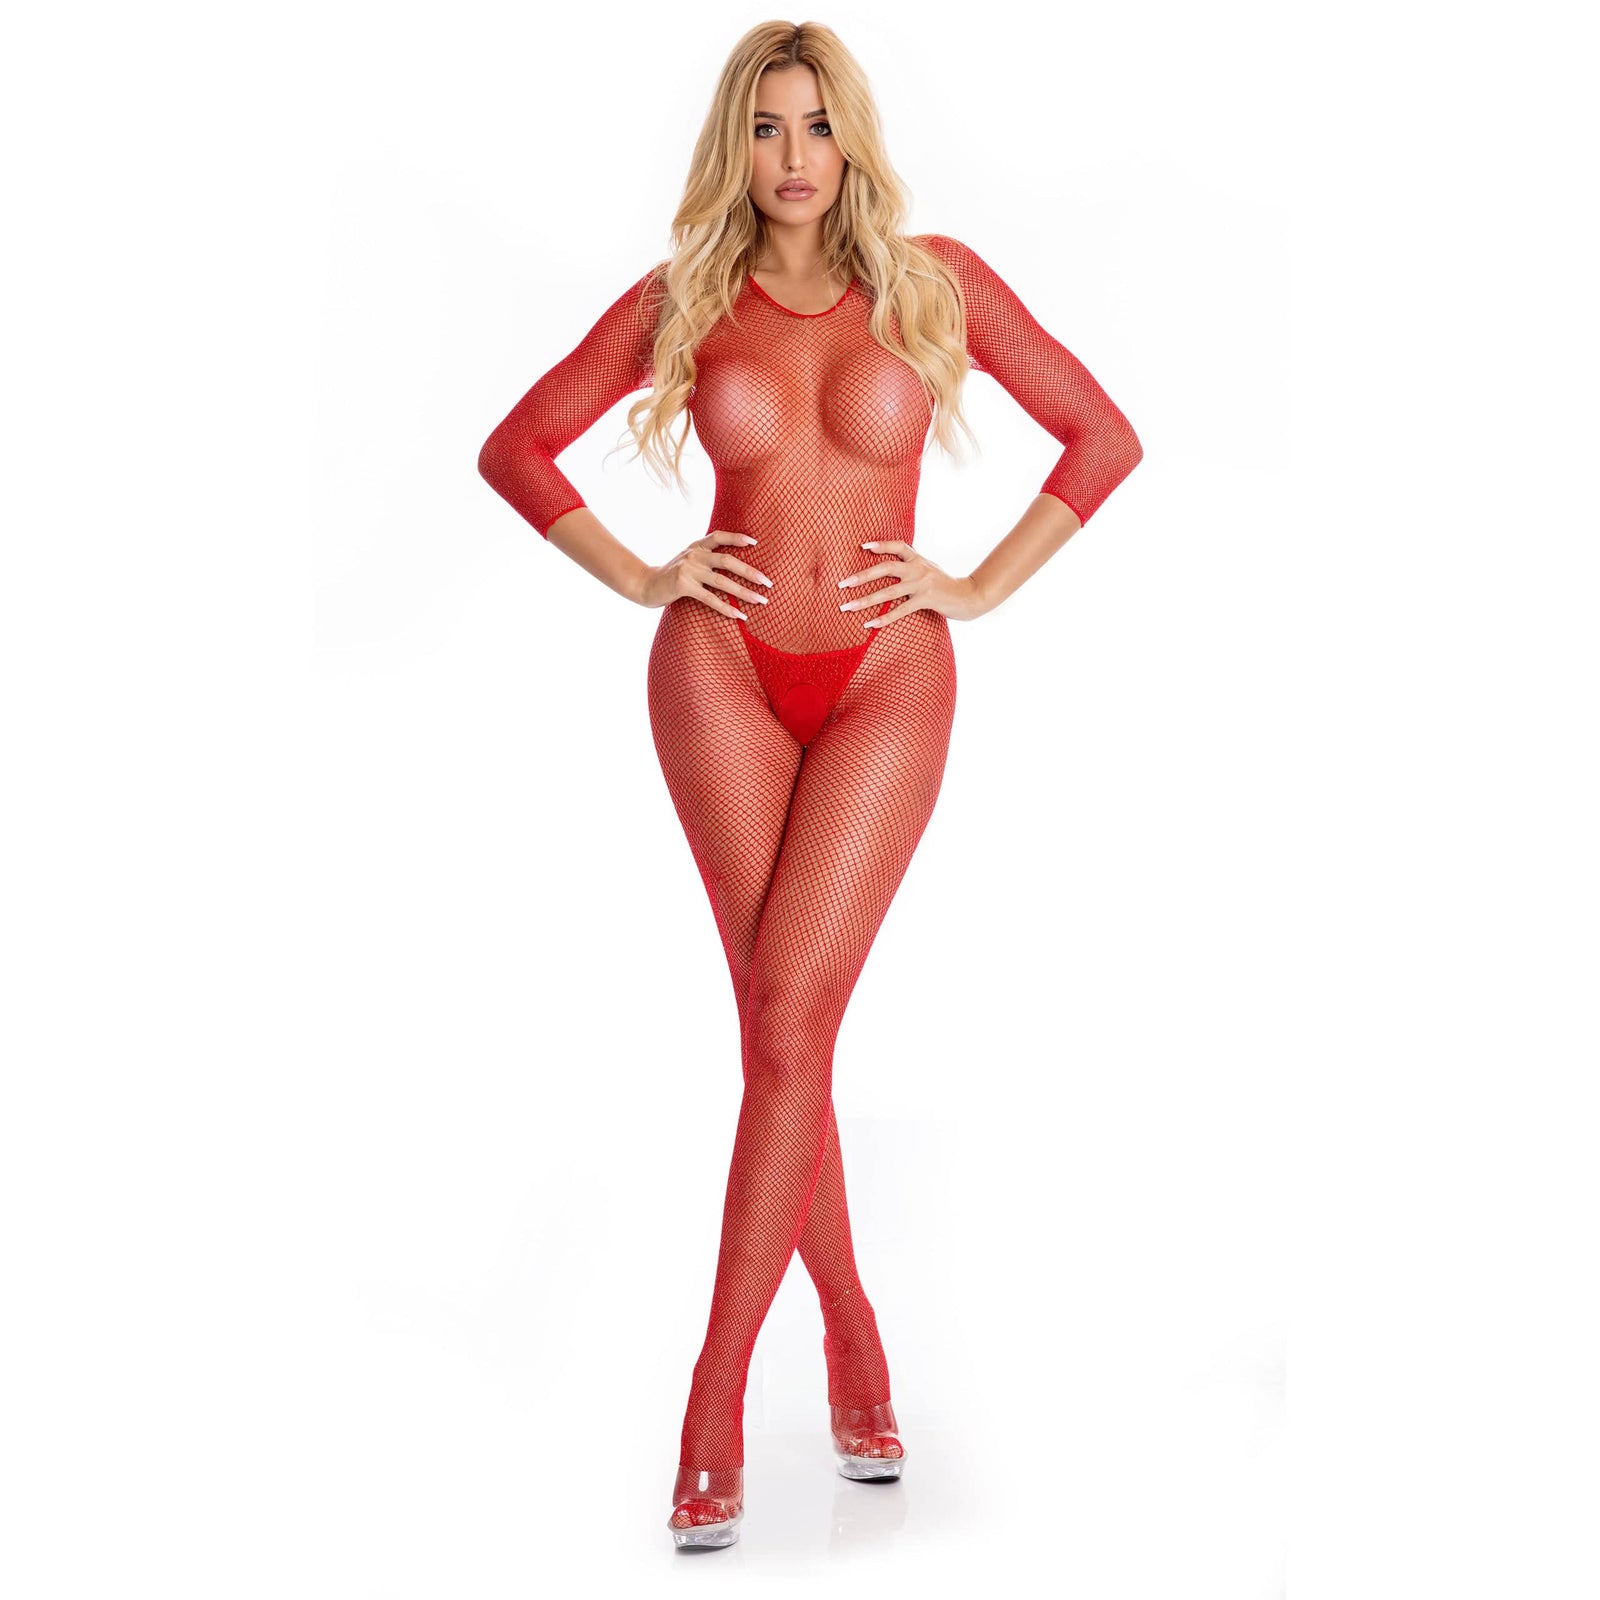 Pink Lipstick - Risque Crotchless Bodystocking Costume M/L (Red) Bodystockings 017036488696 CherryAffairs